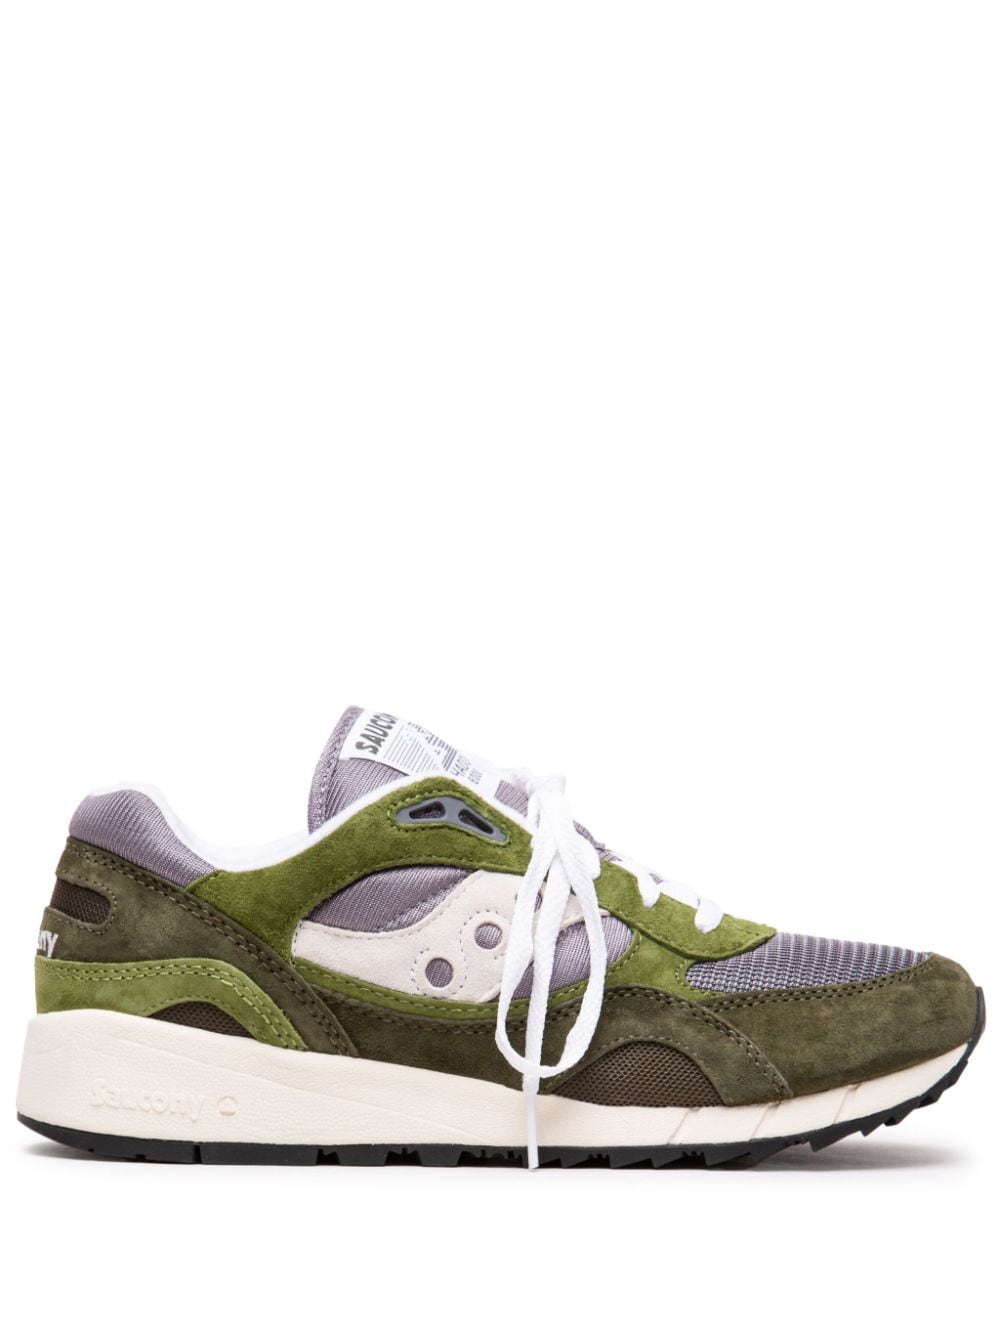 Saucony Shadow 6000 In Grey & Forest